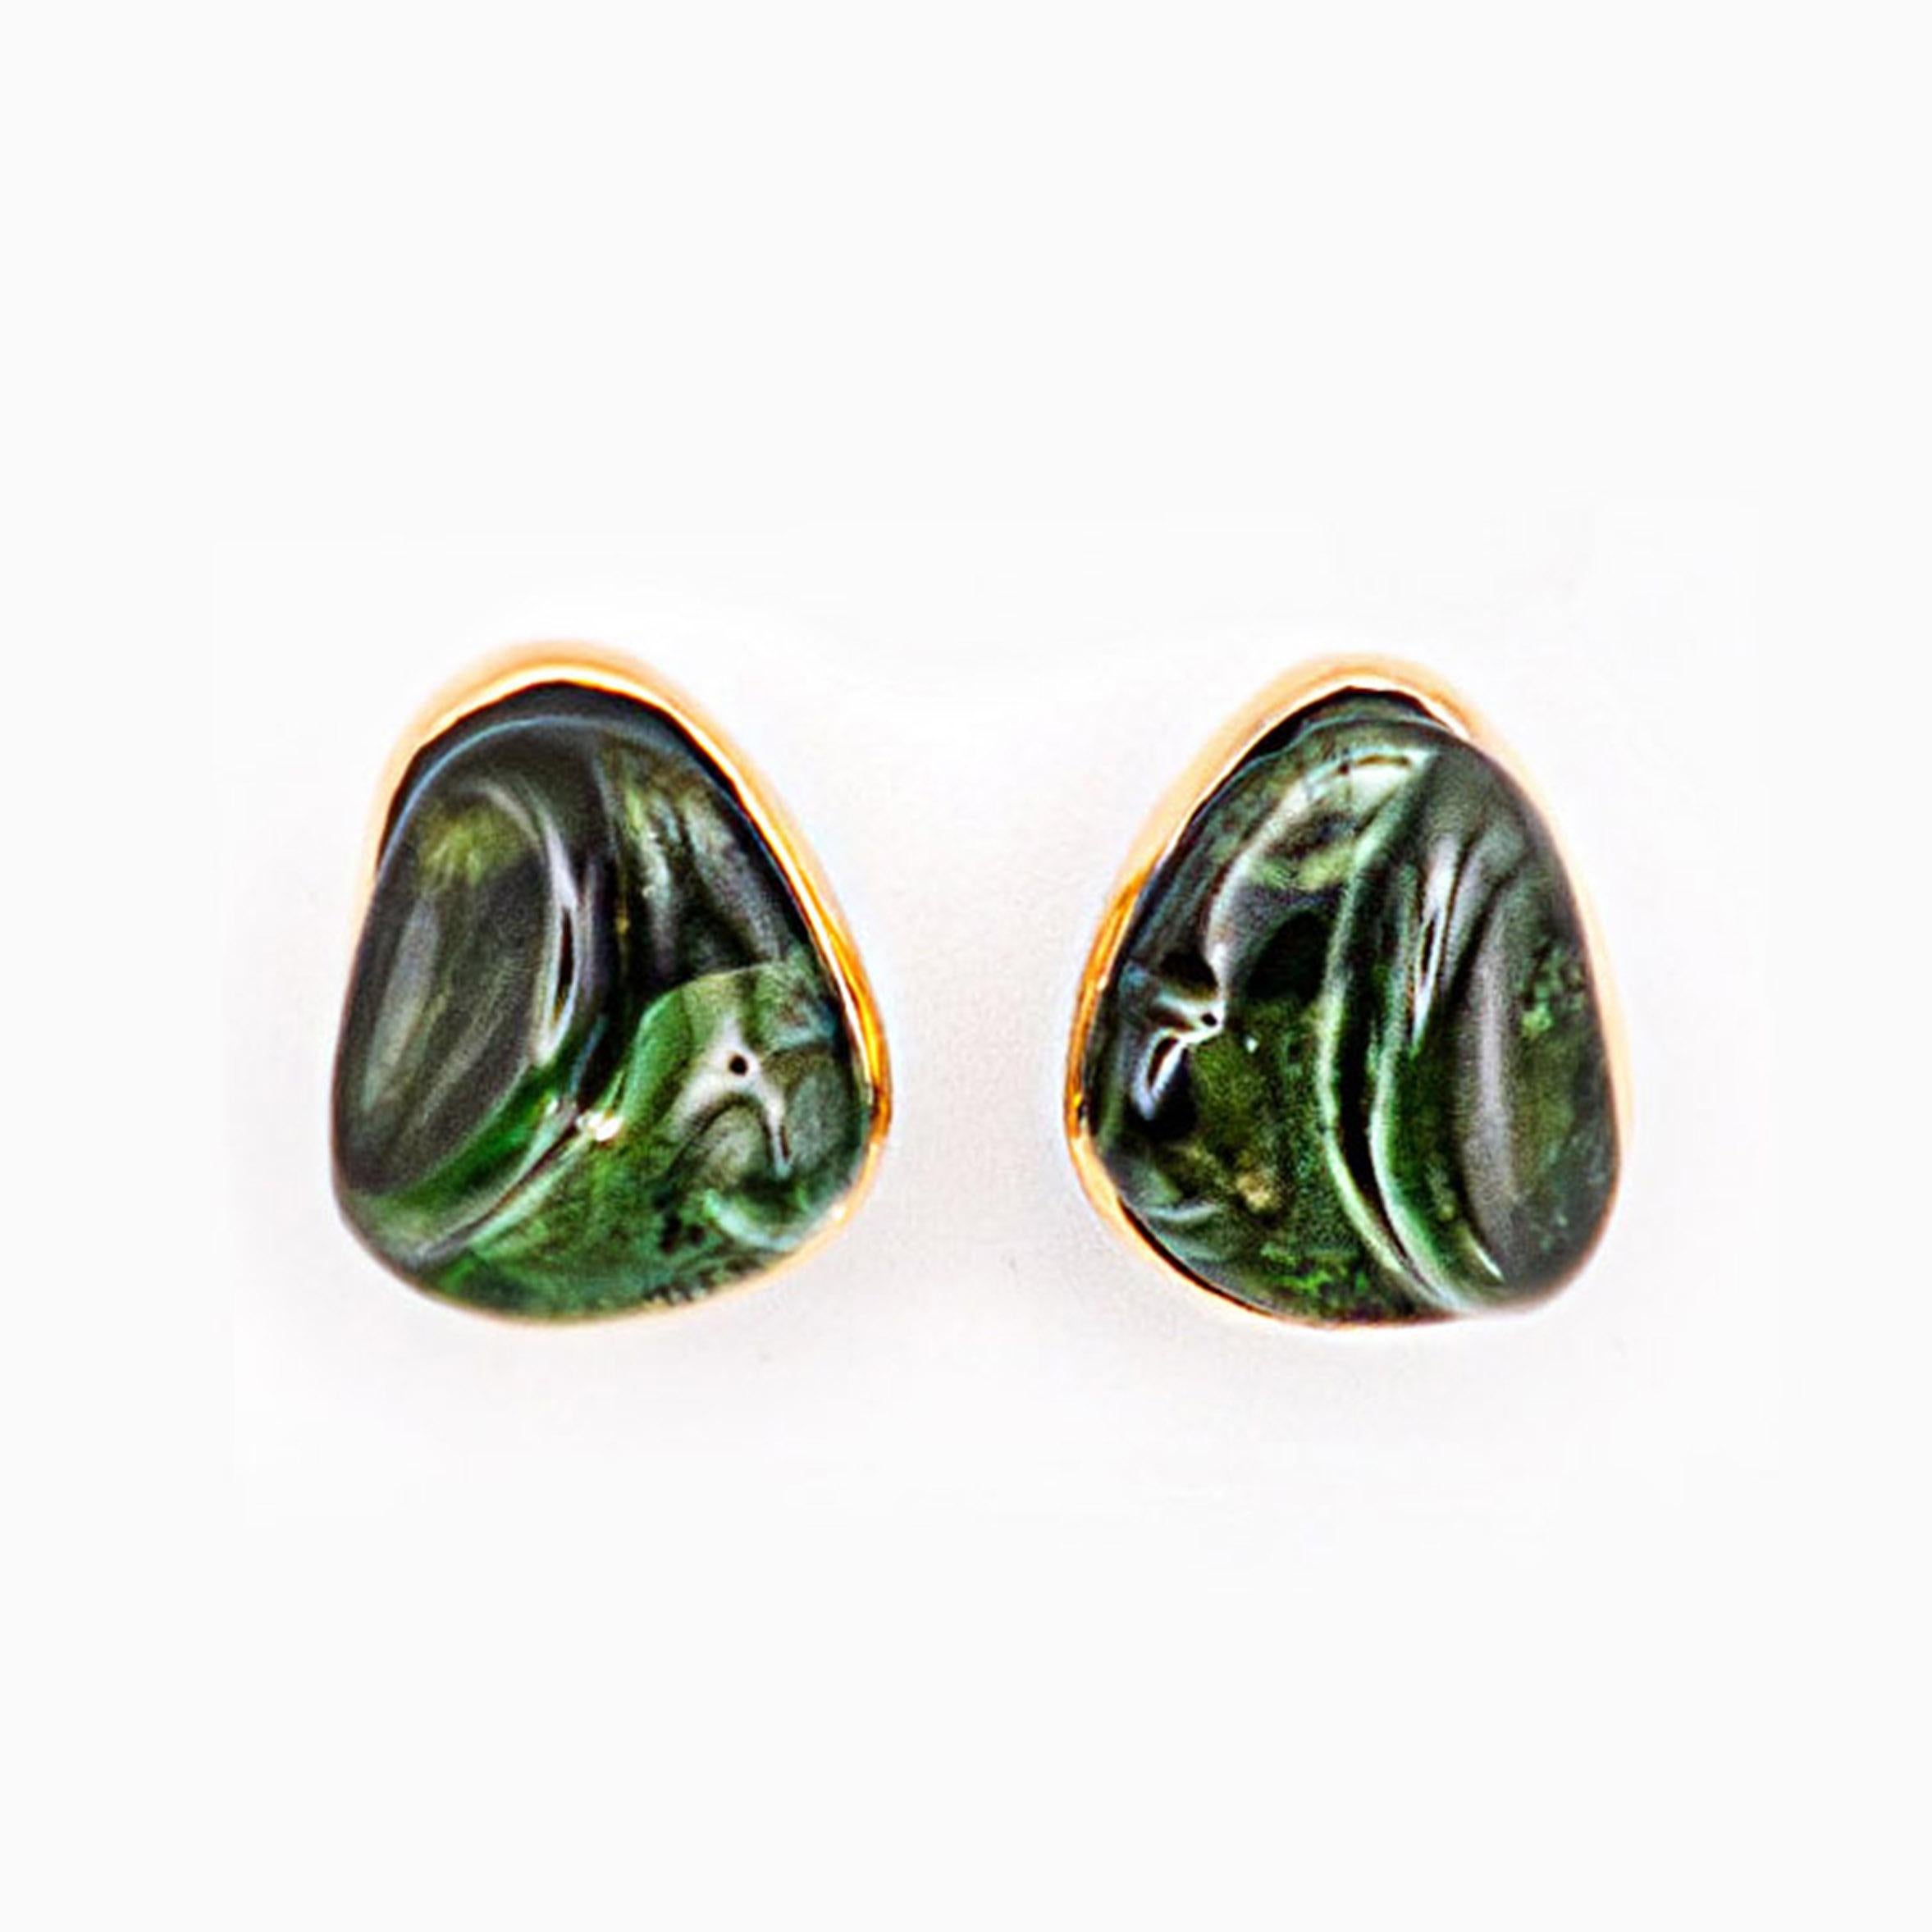 One pair of carved green tourmalines earrings
18K Gold - Signed Burle Marx

The handcrafted jewels of Haroldo Burle Marx are characterized by a timeless quality that reflects the era of Cleopatra and the concepts of tomorrow


